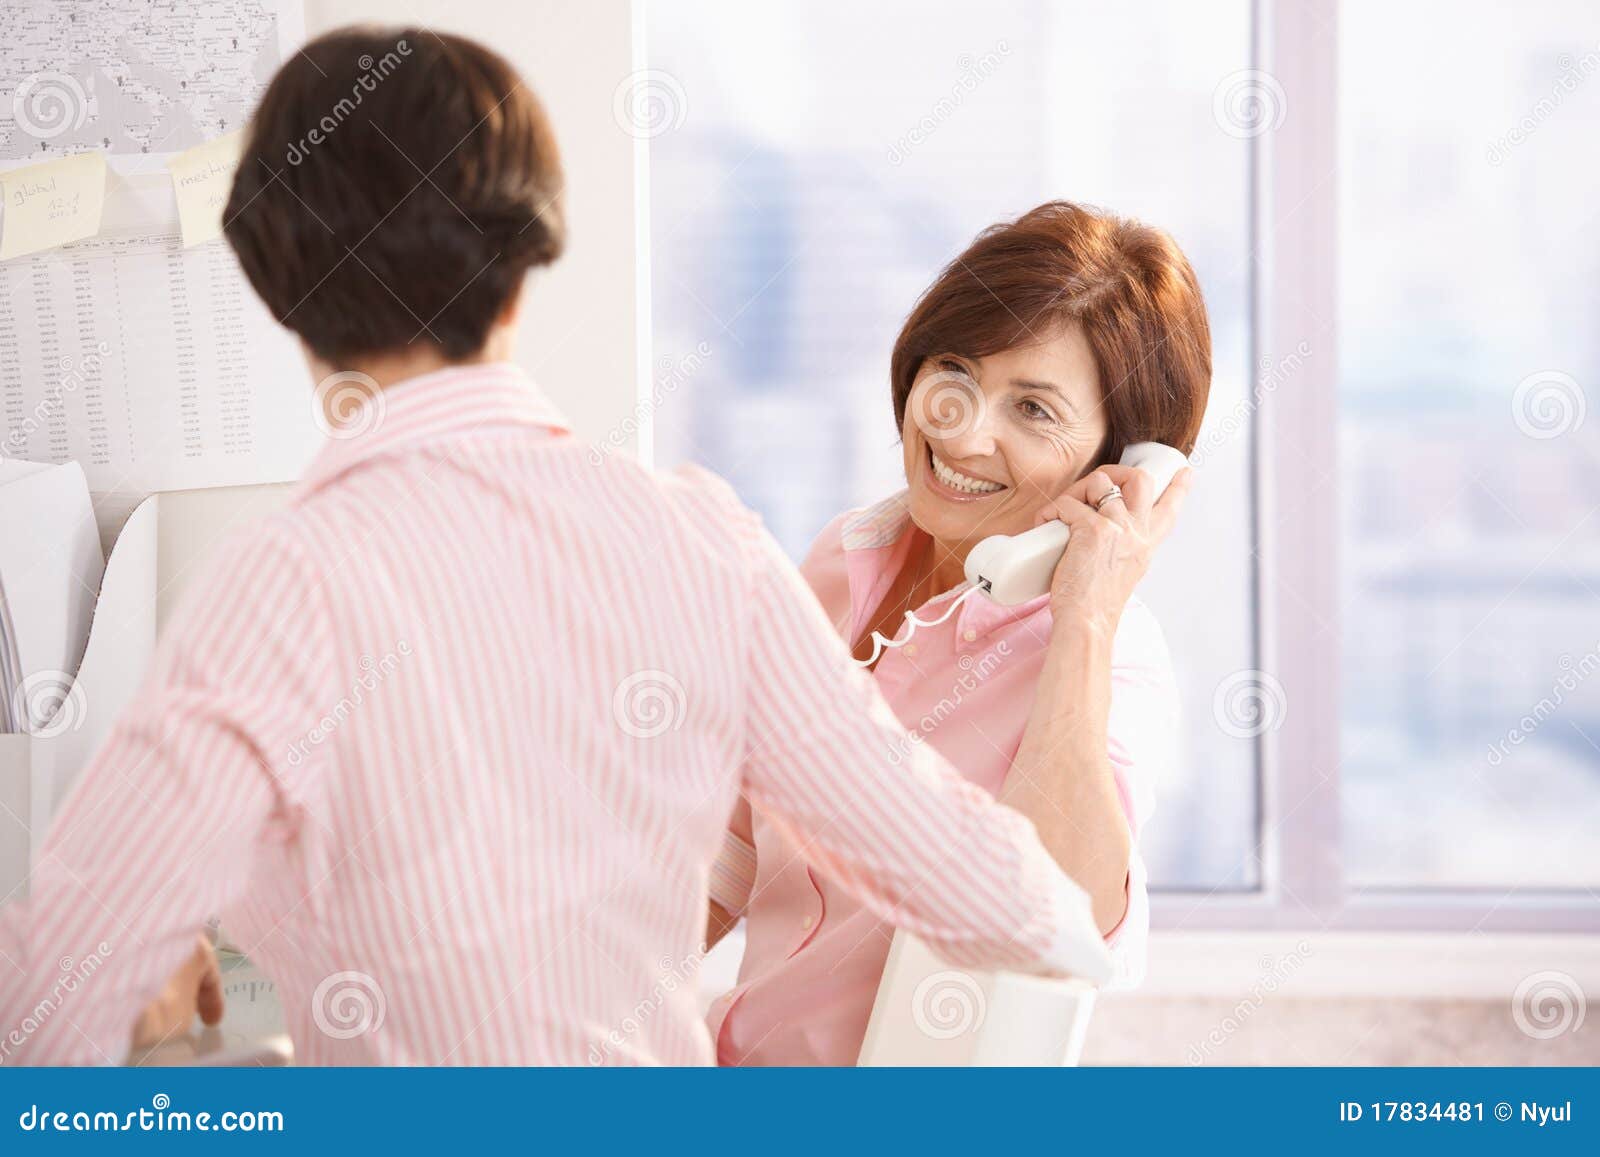 senior woman on phone call, sitting with coworker